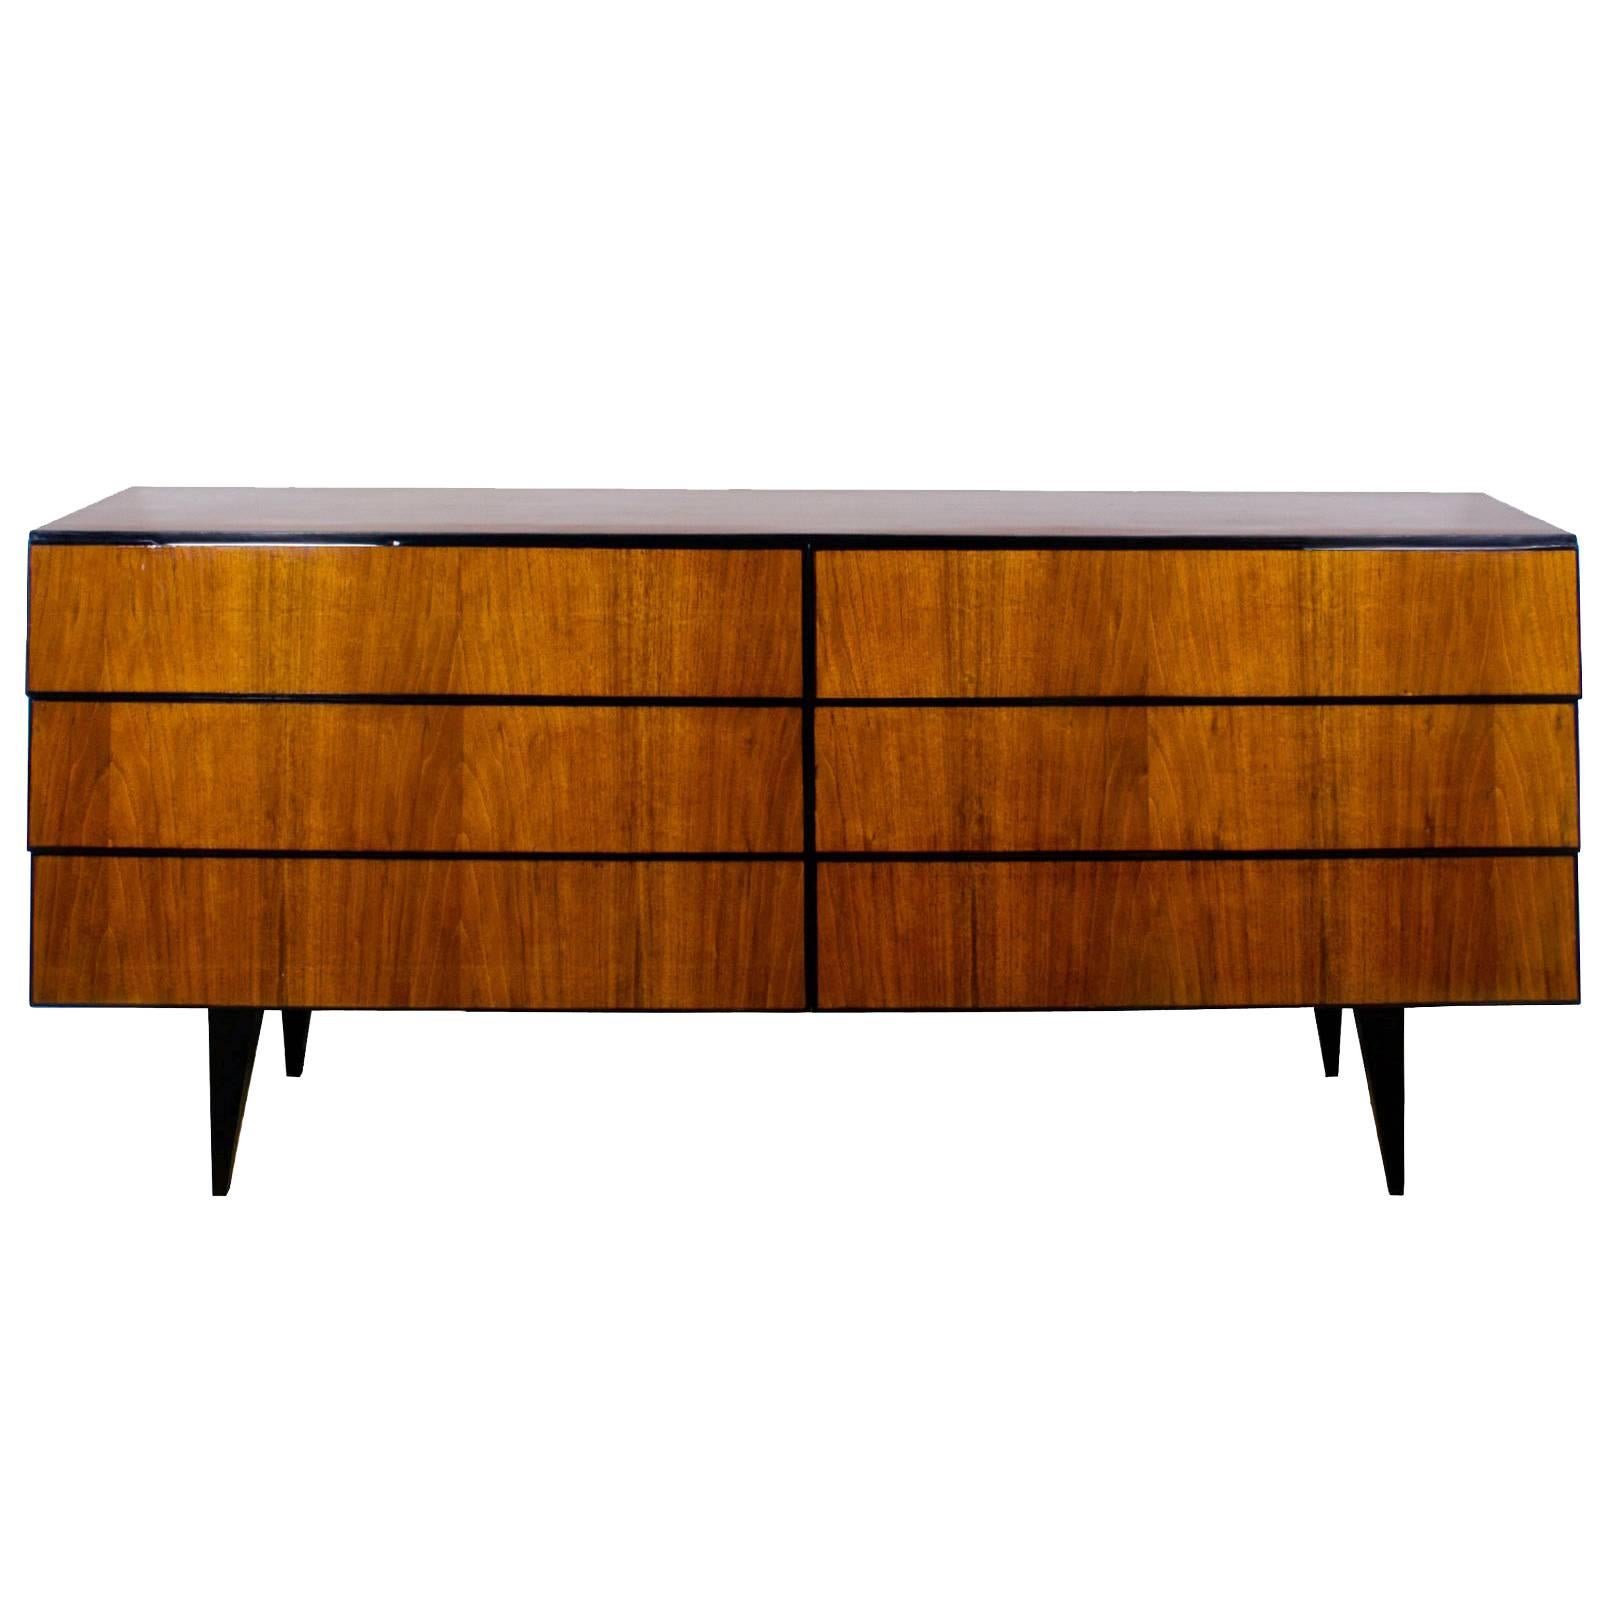 1950s Long Commode with Six Drawers, Walnut Veneer, Italy